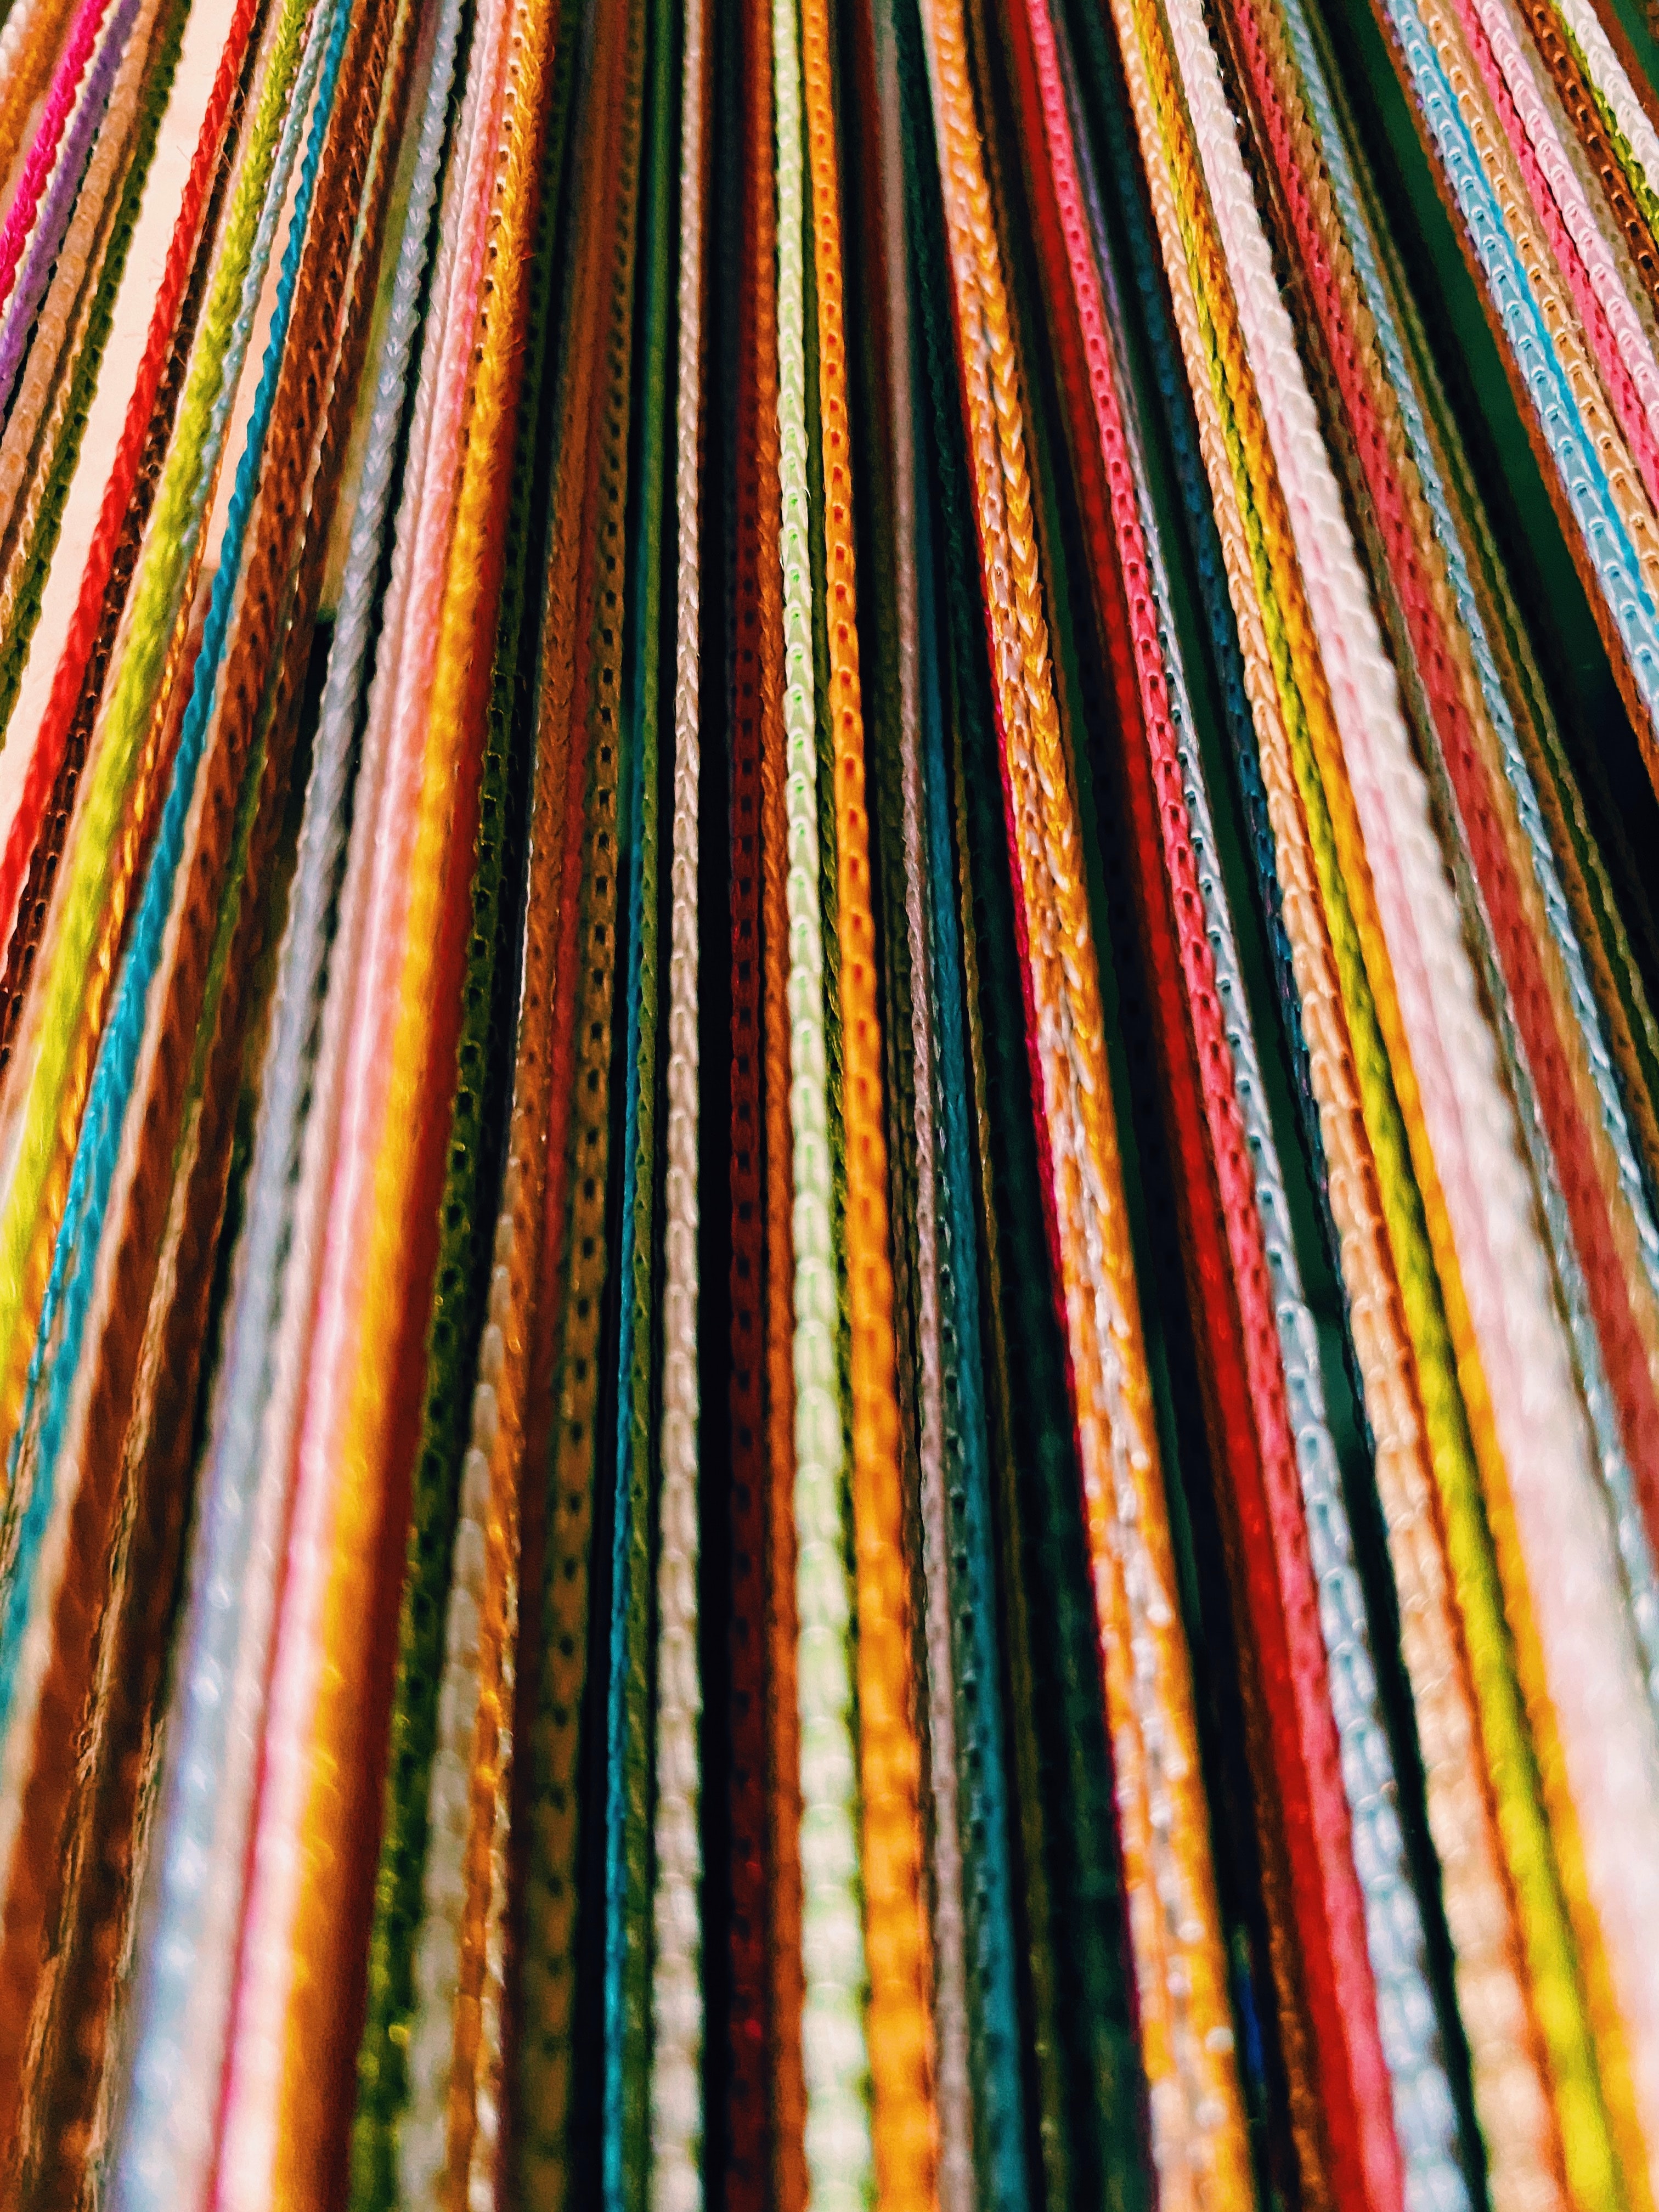 ropes, cordage, multicolored, motley, texture, textures, stripes, streaks, threads, thread